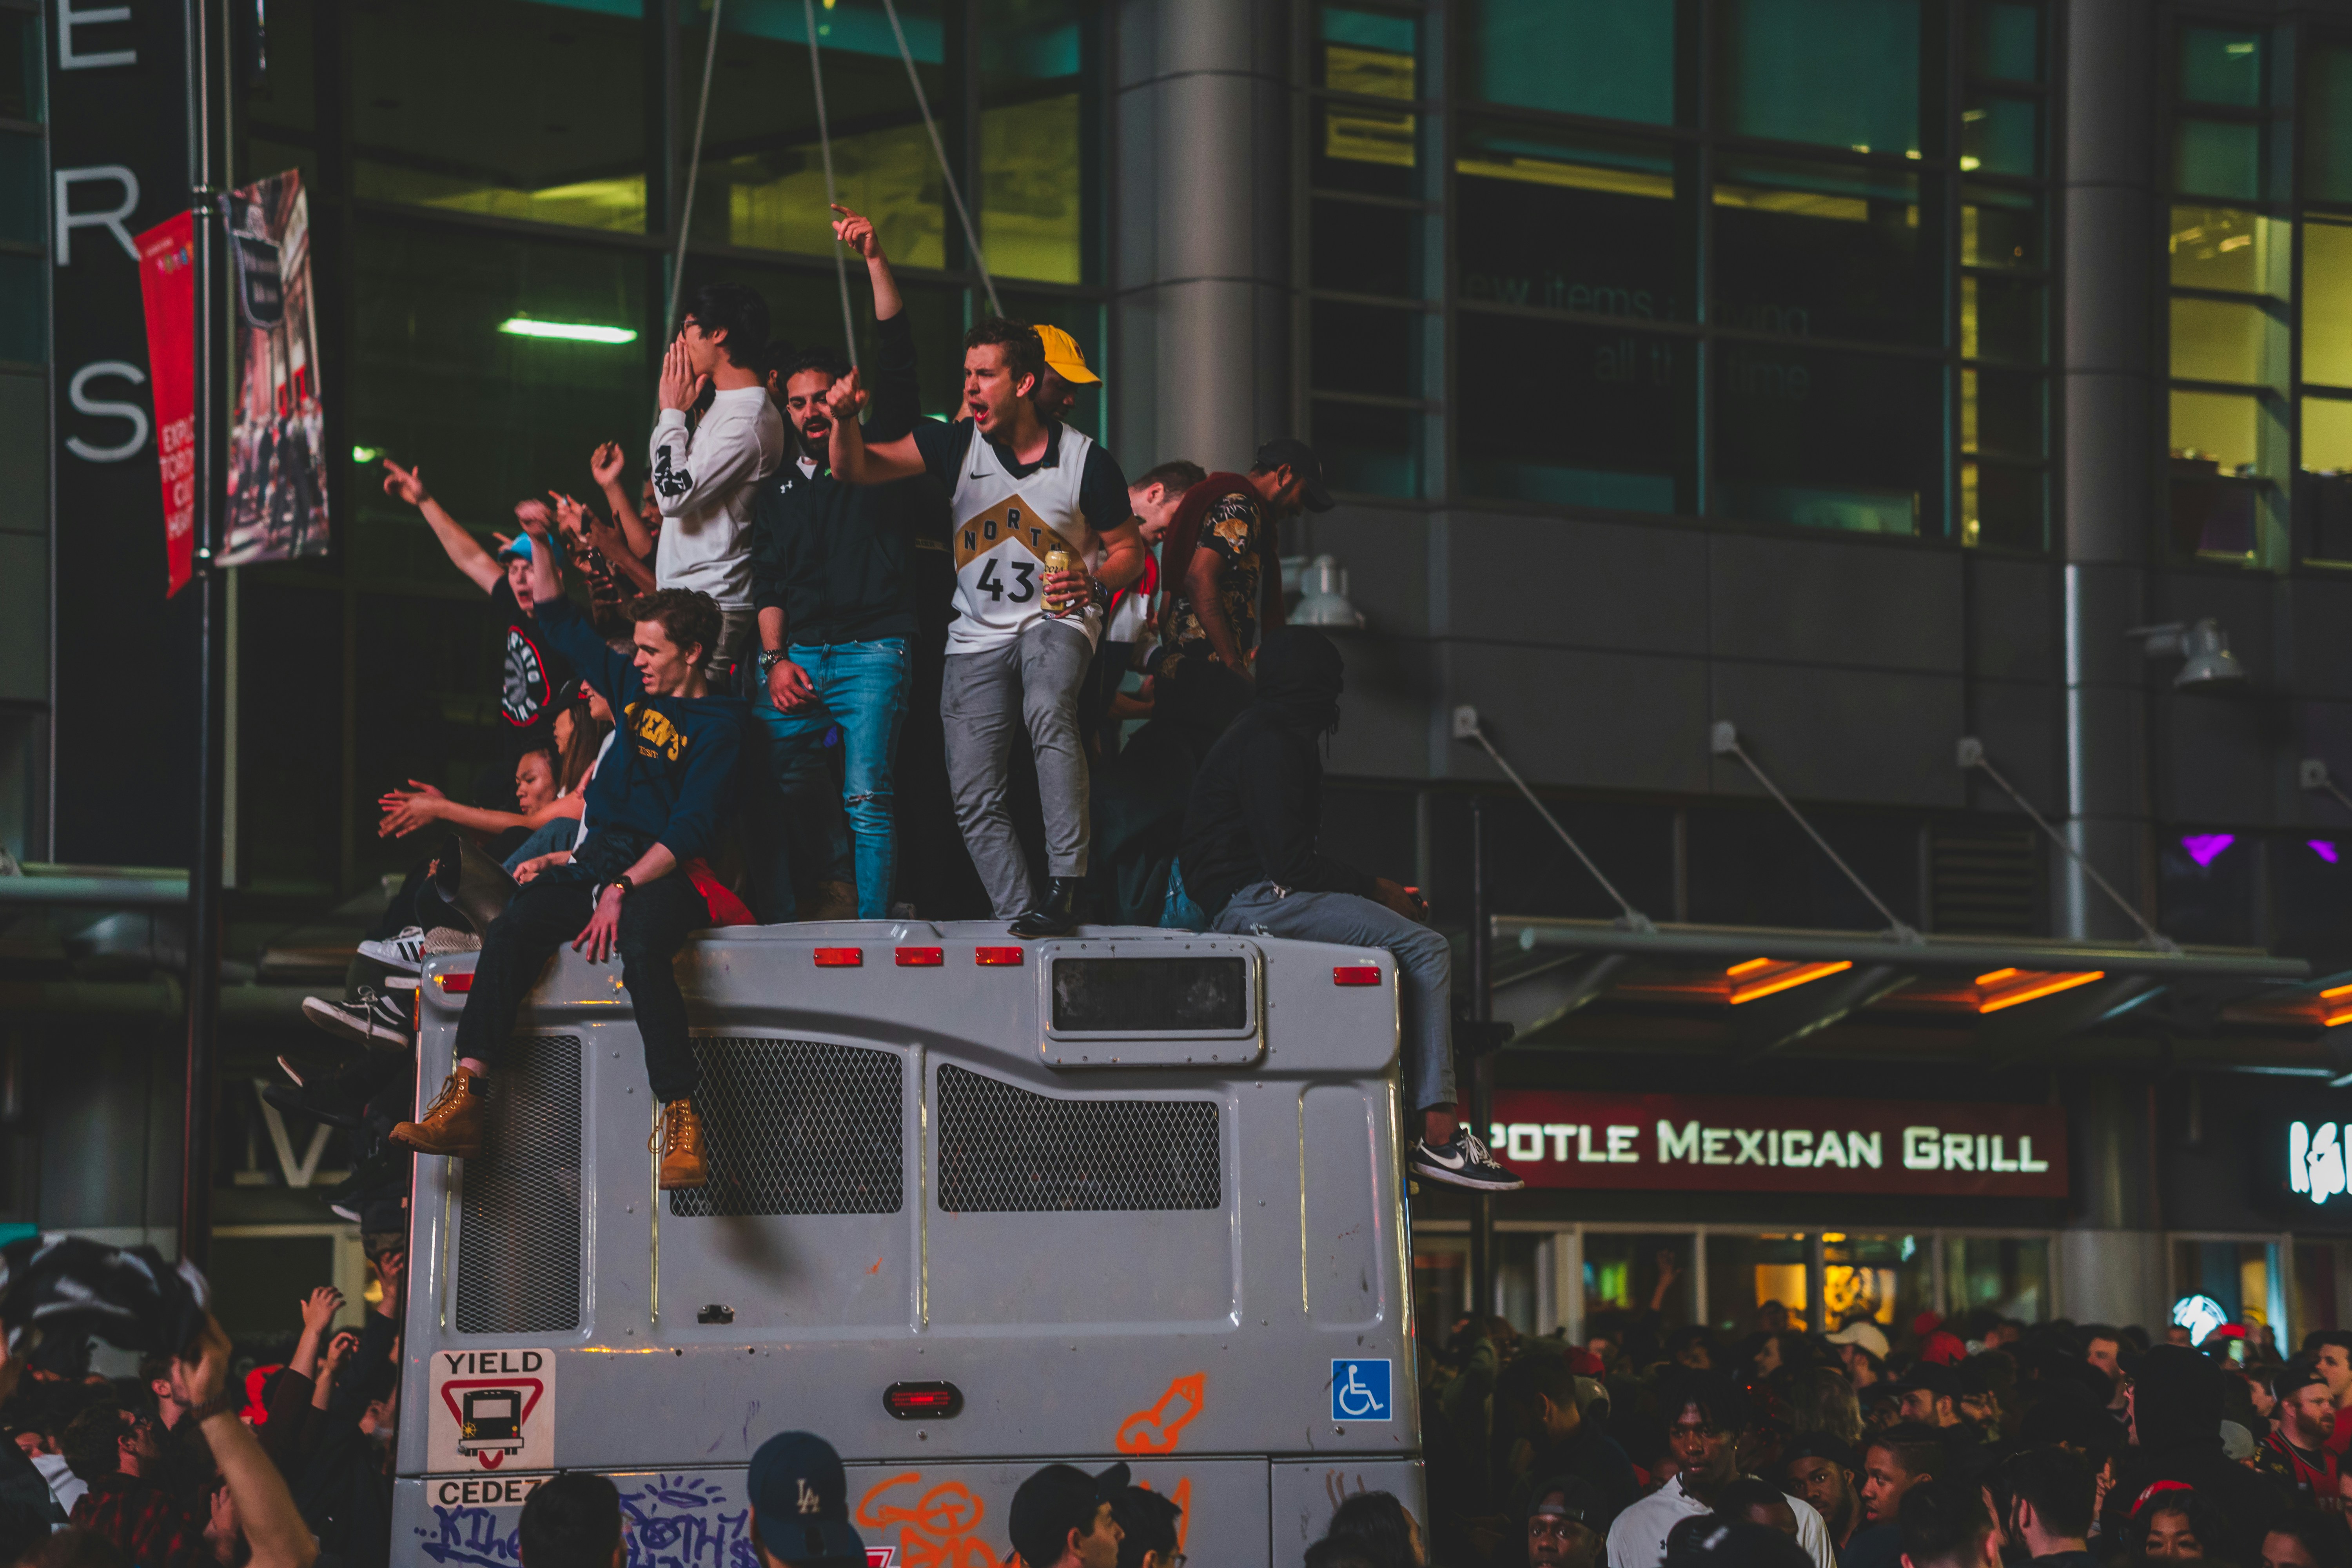 Toronto Raptors fans celebrating on top of a bus after we took home the 2019 NBA championship.